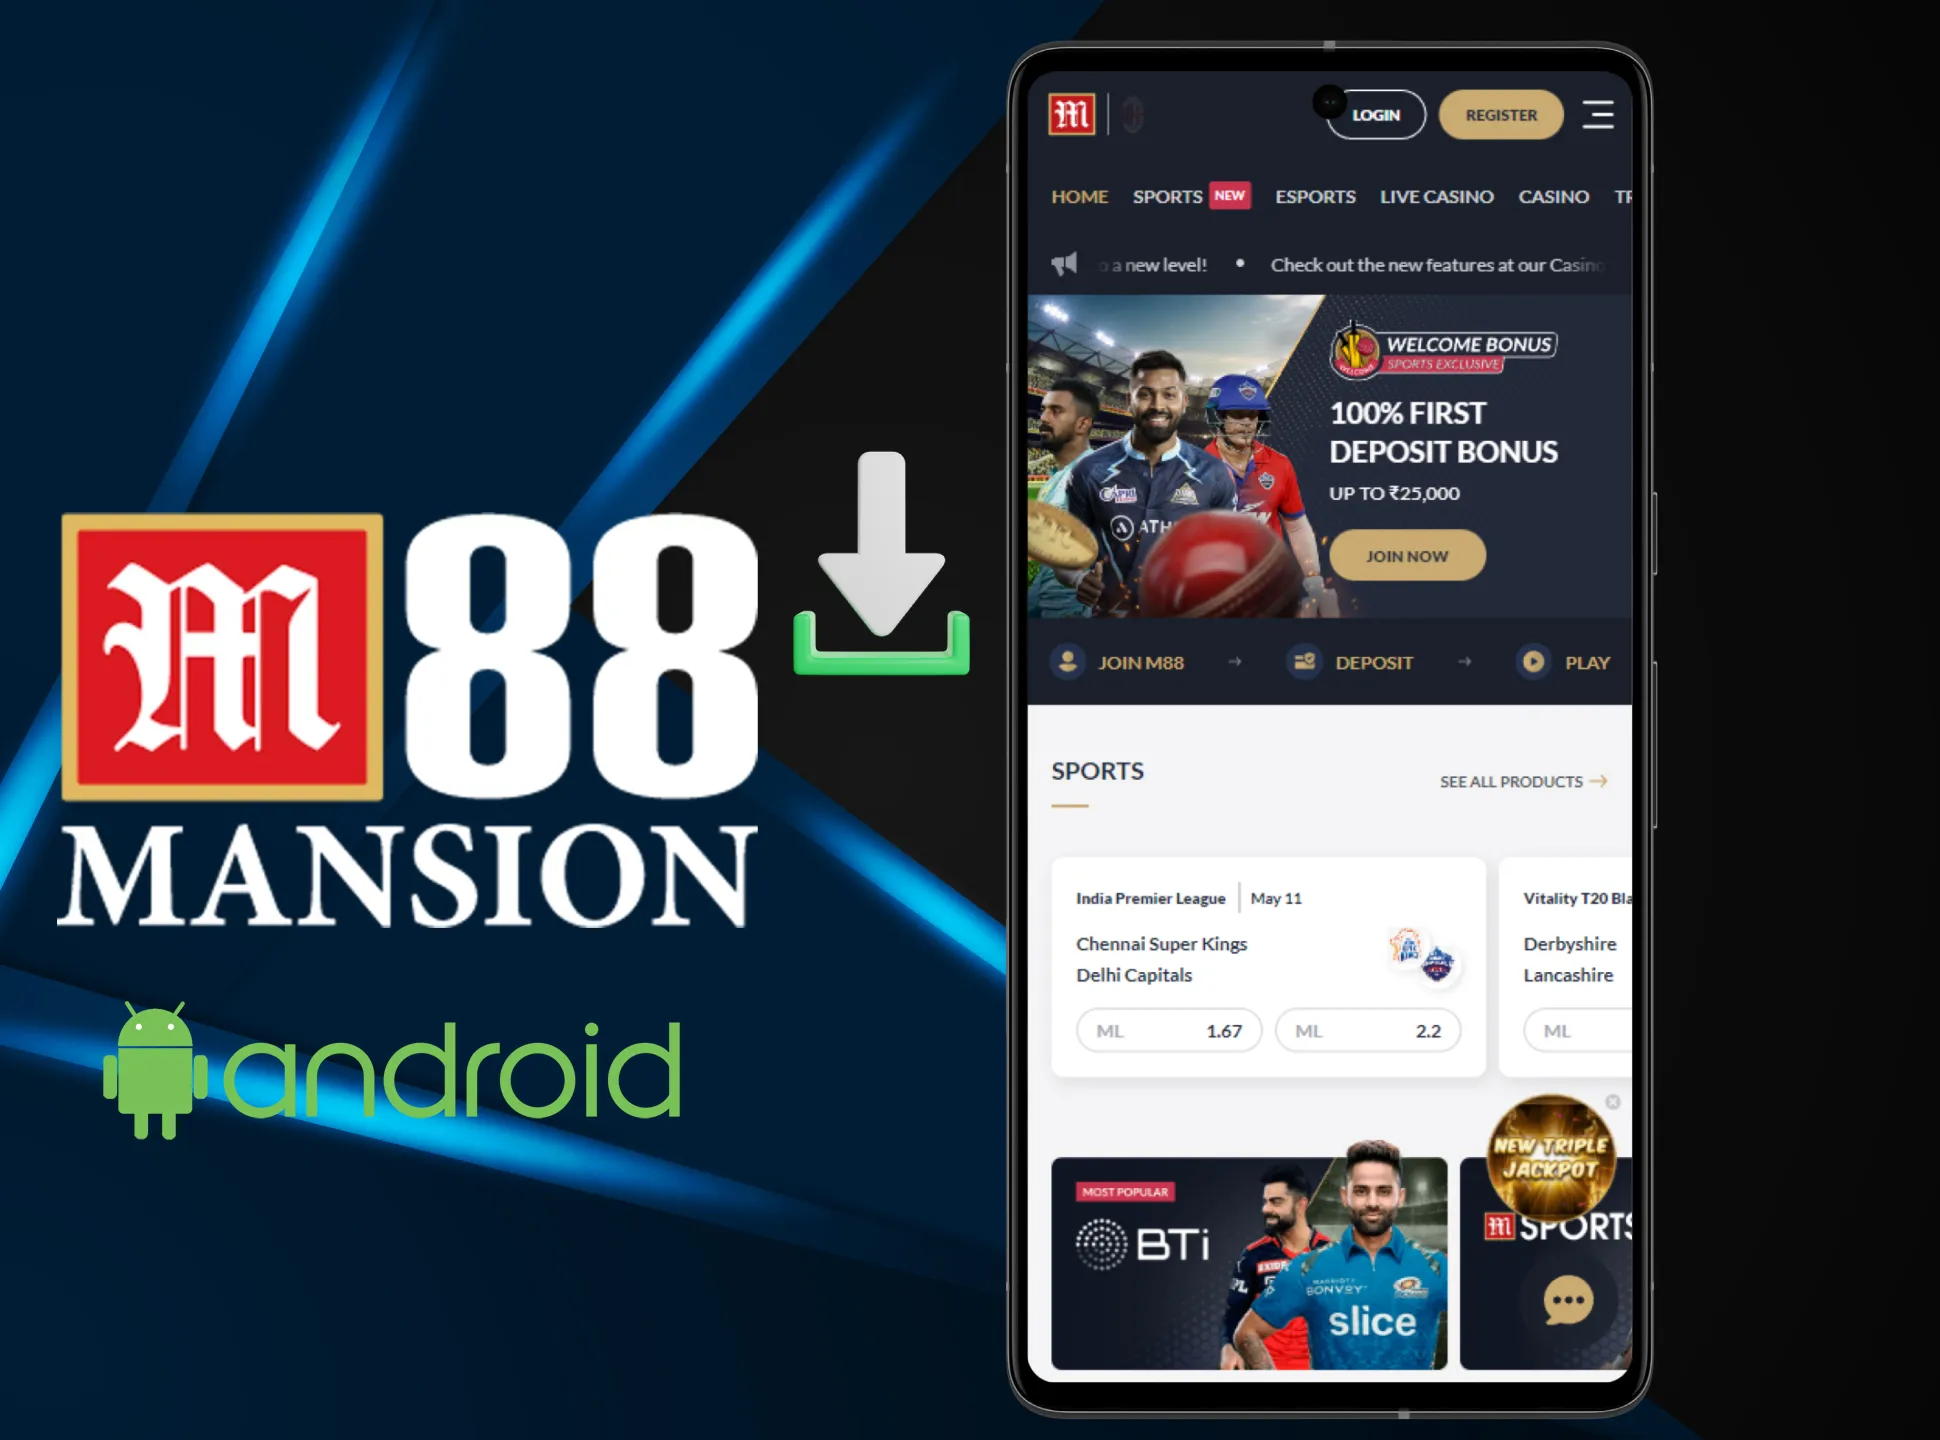 Download M88 Android app and install it on all of your devices.